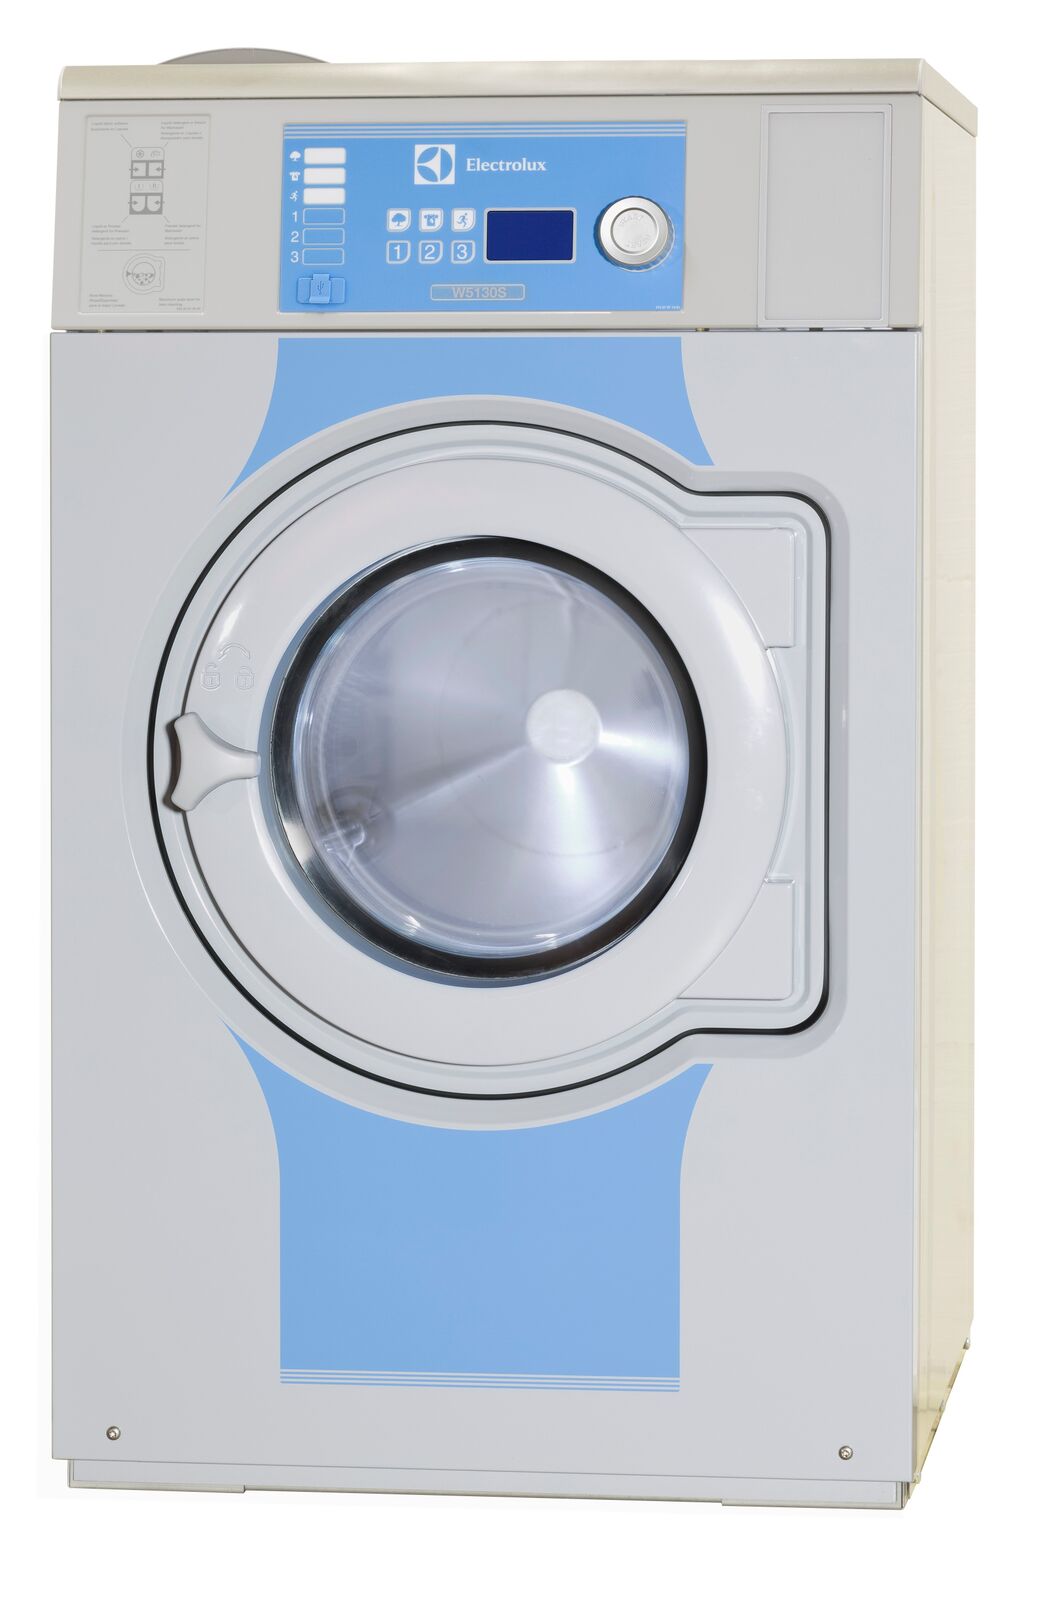 New 2020 Electrolux W5130N - Cardinal Laundry Equipment Co